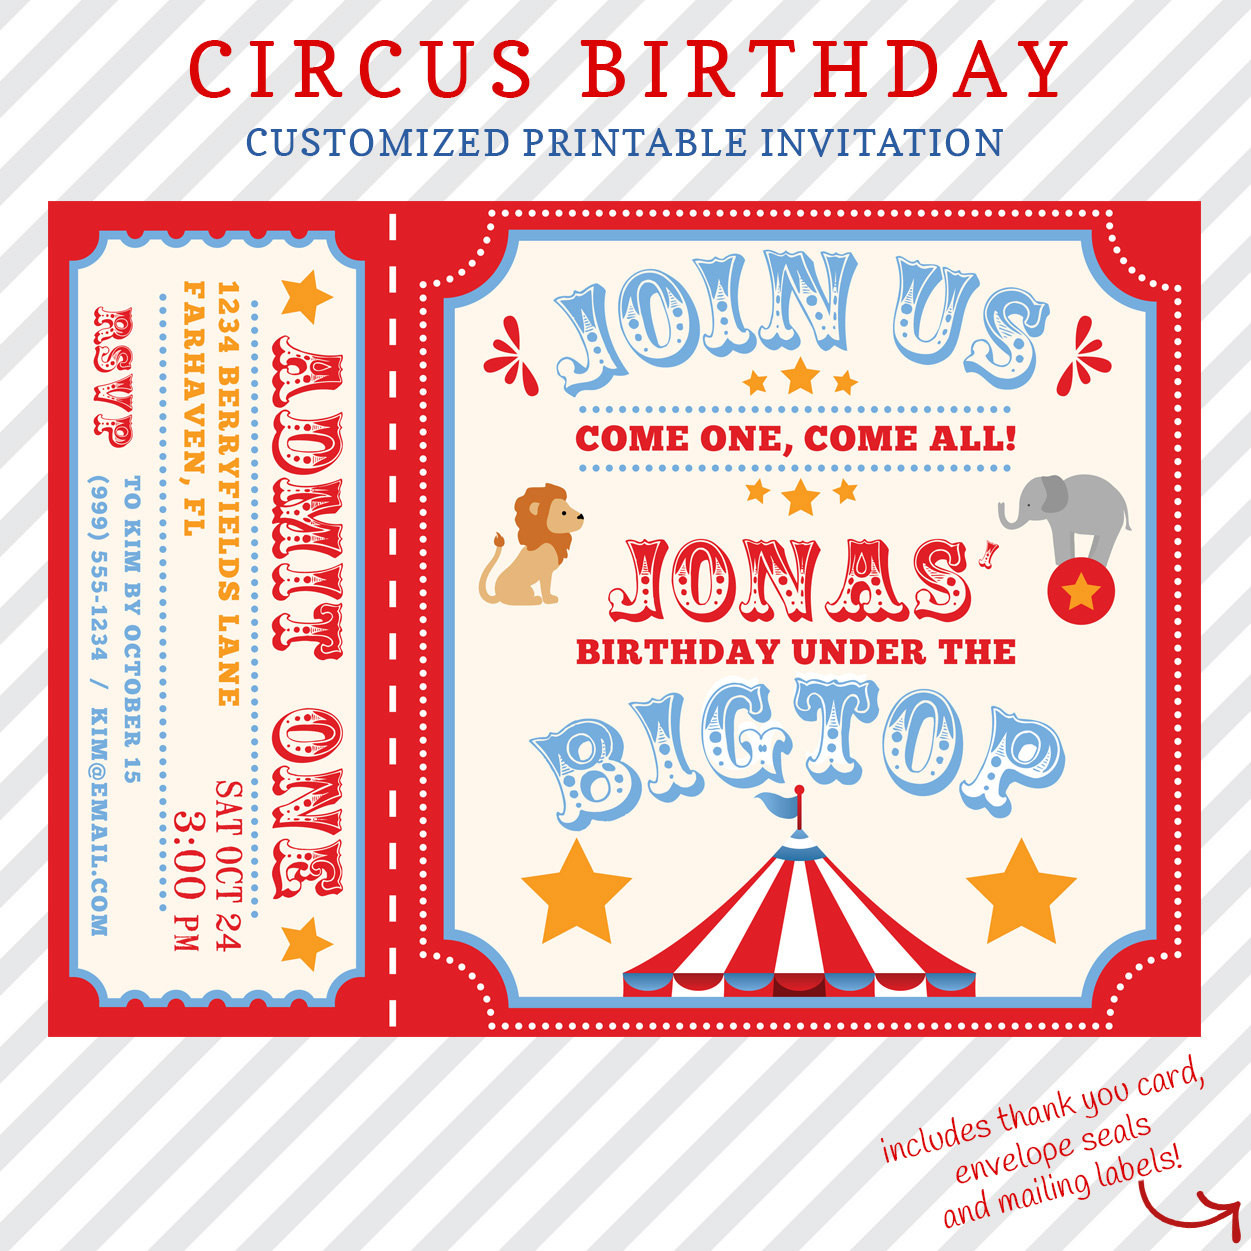 Free Printable Carnival Birthday Invitations
 Circus Birthday Invitation Printable custom invitation with